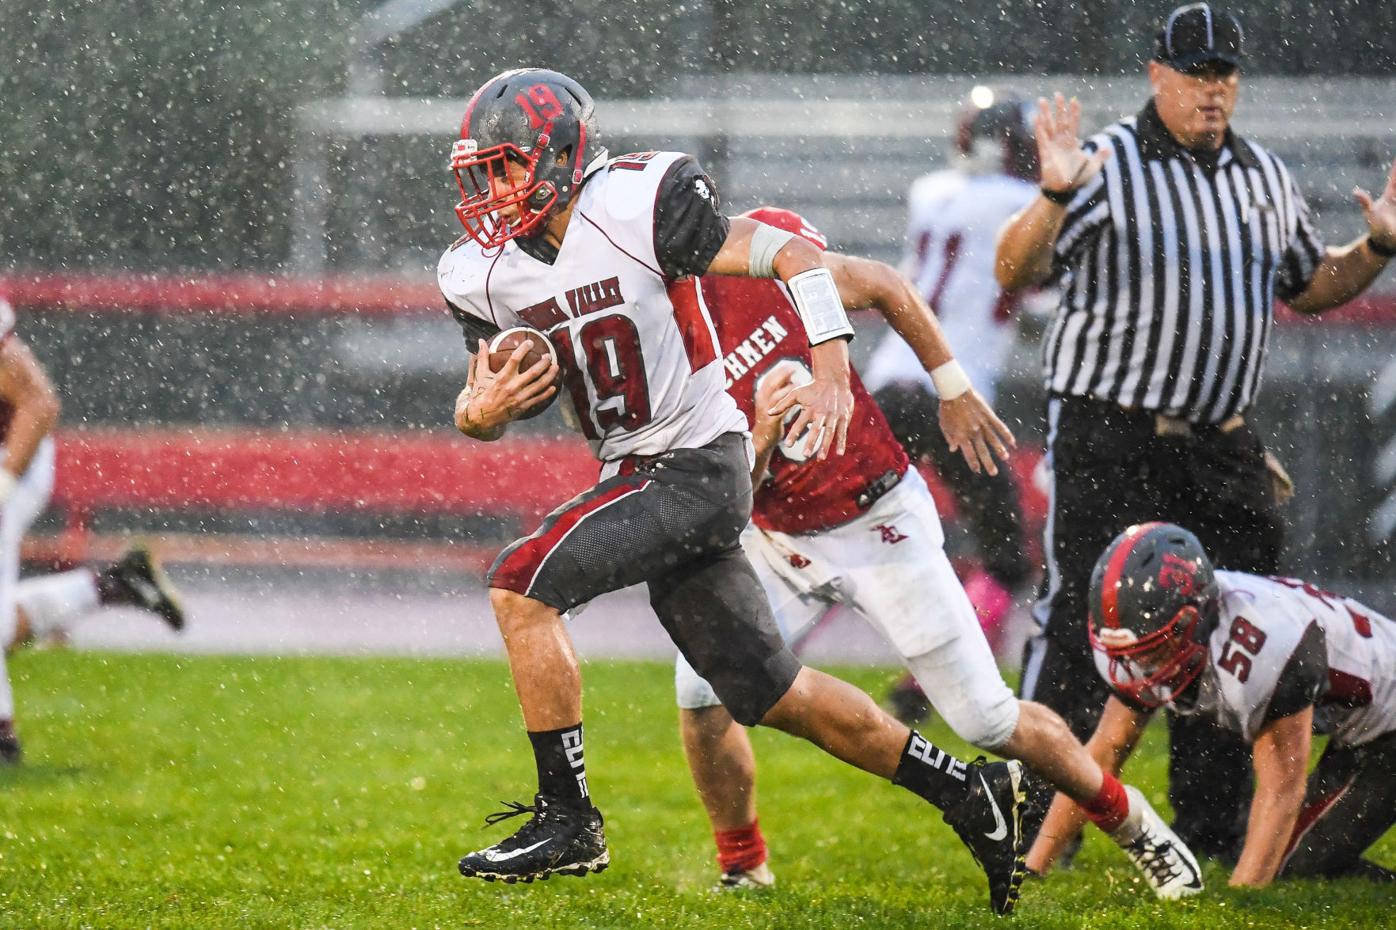 2019 Pequea Valley at Annville-Cleona Football